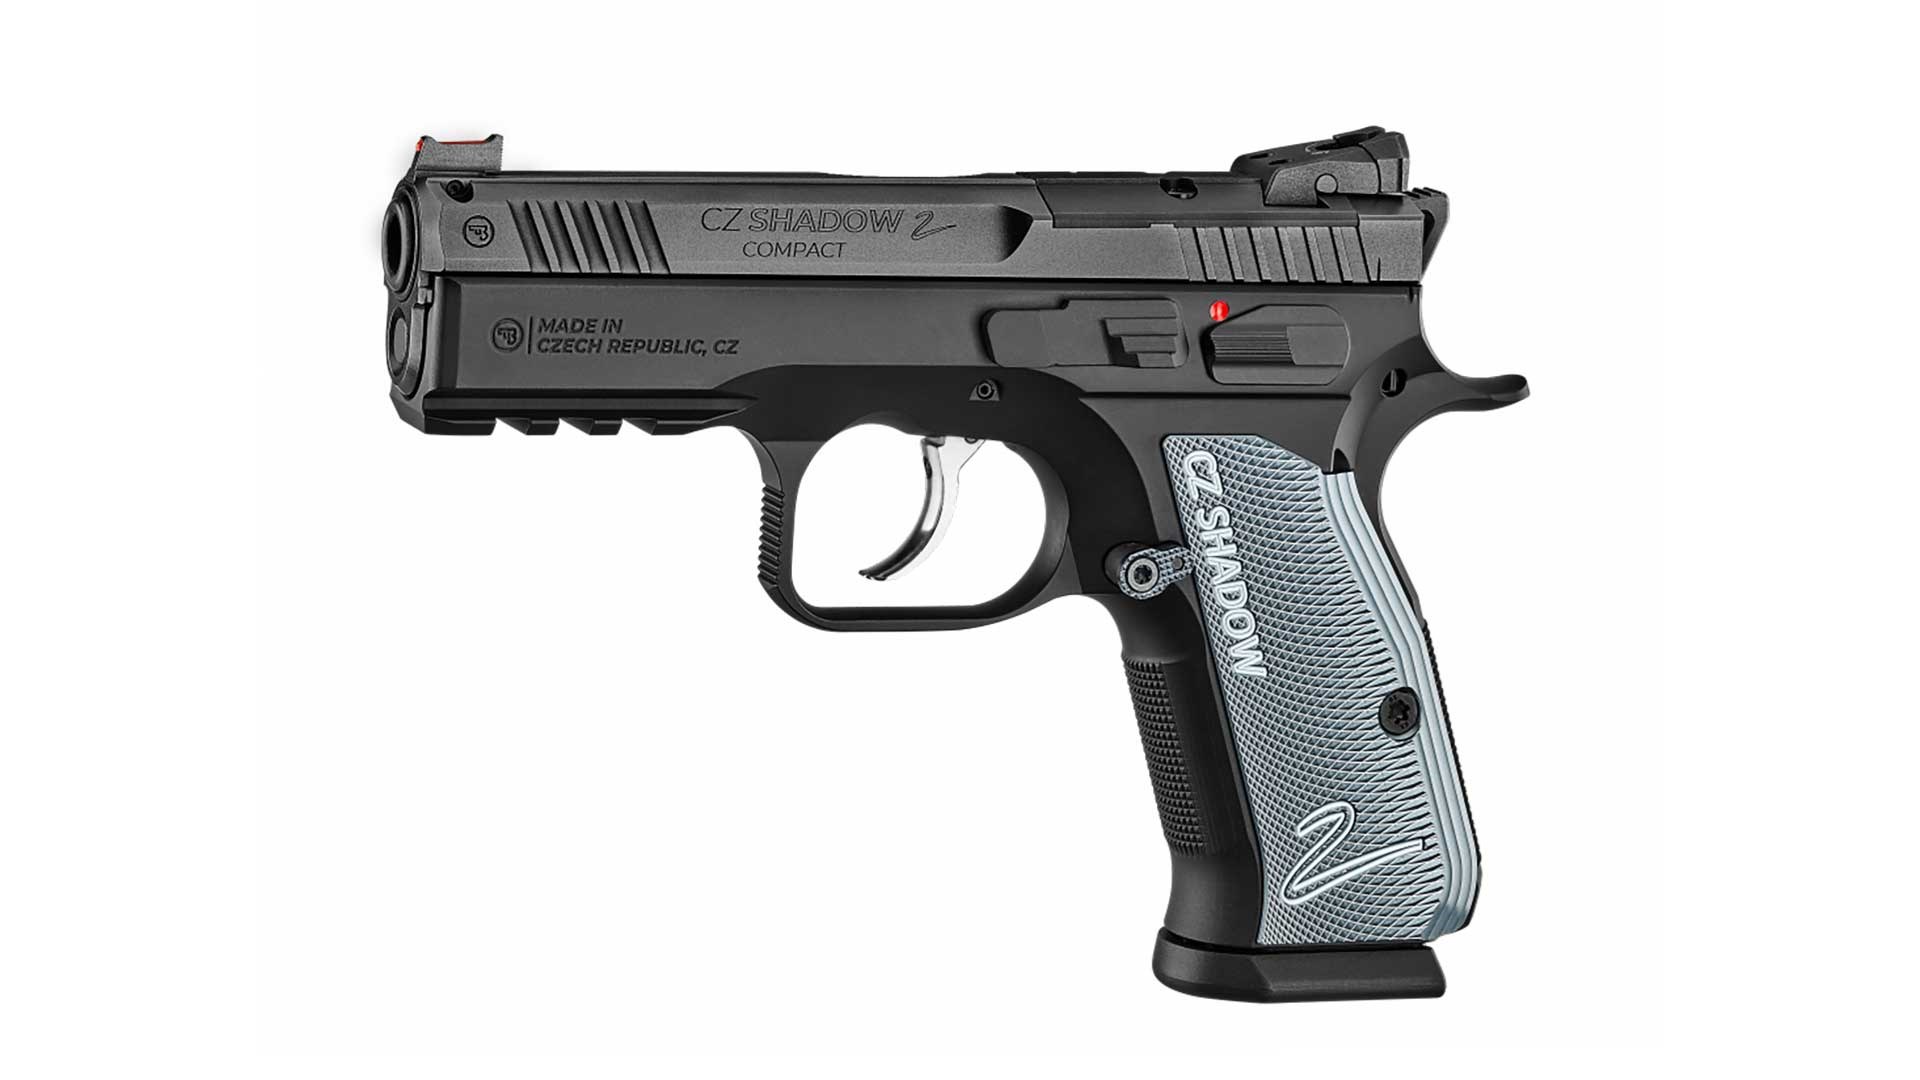 Left side of the CZ Shadow 2 Compact pistol.